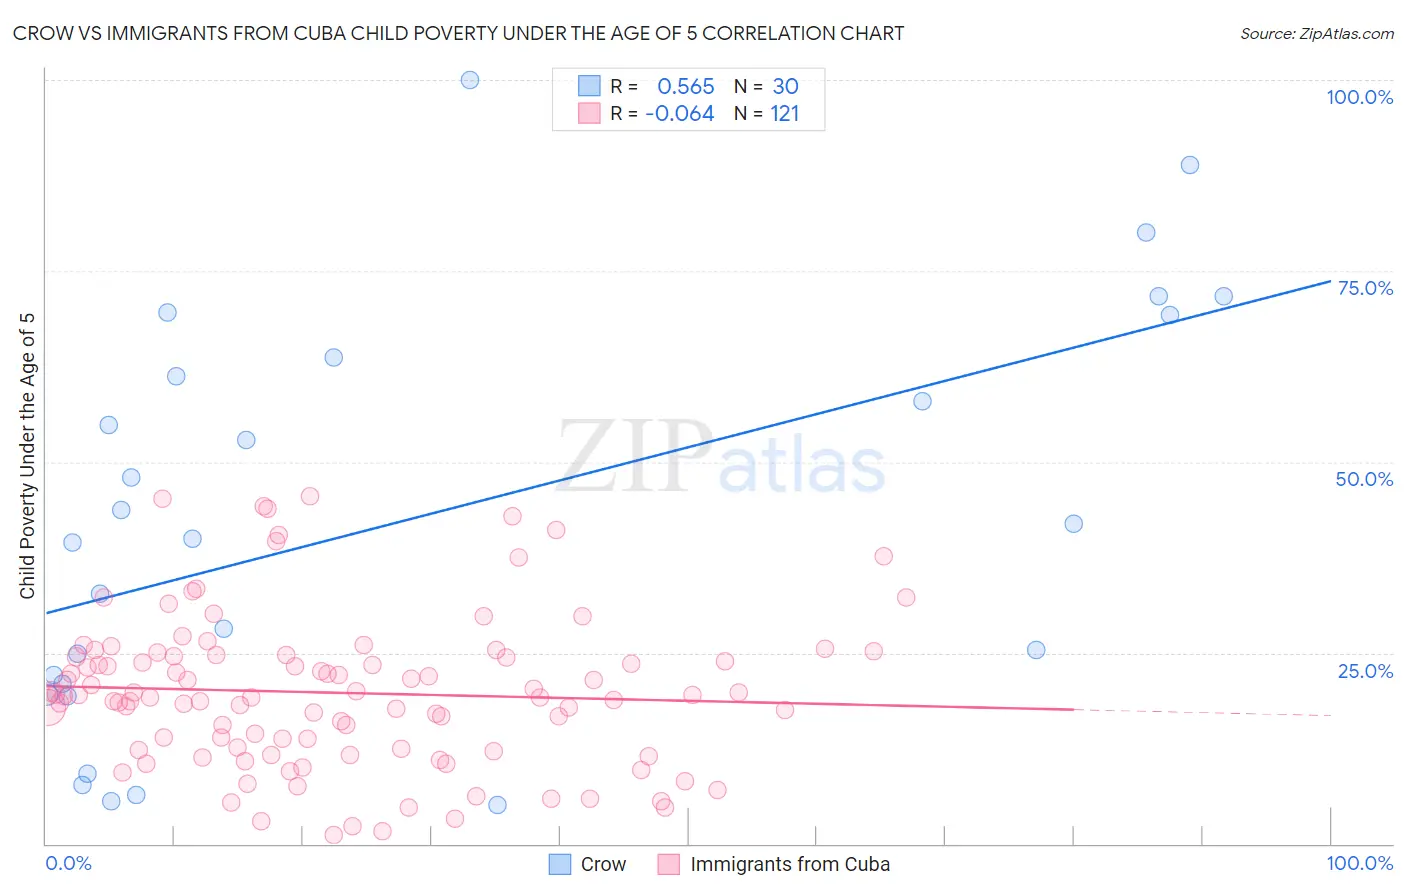 Crow vs Immigrants from Cuba Child Poverty Under the Age of 5